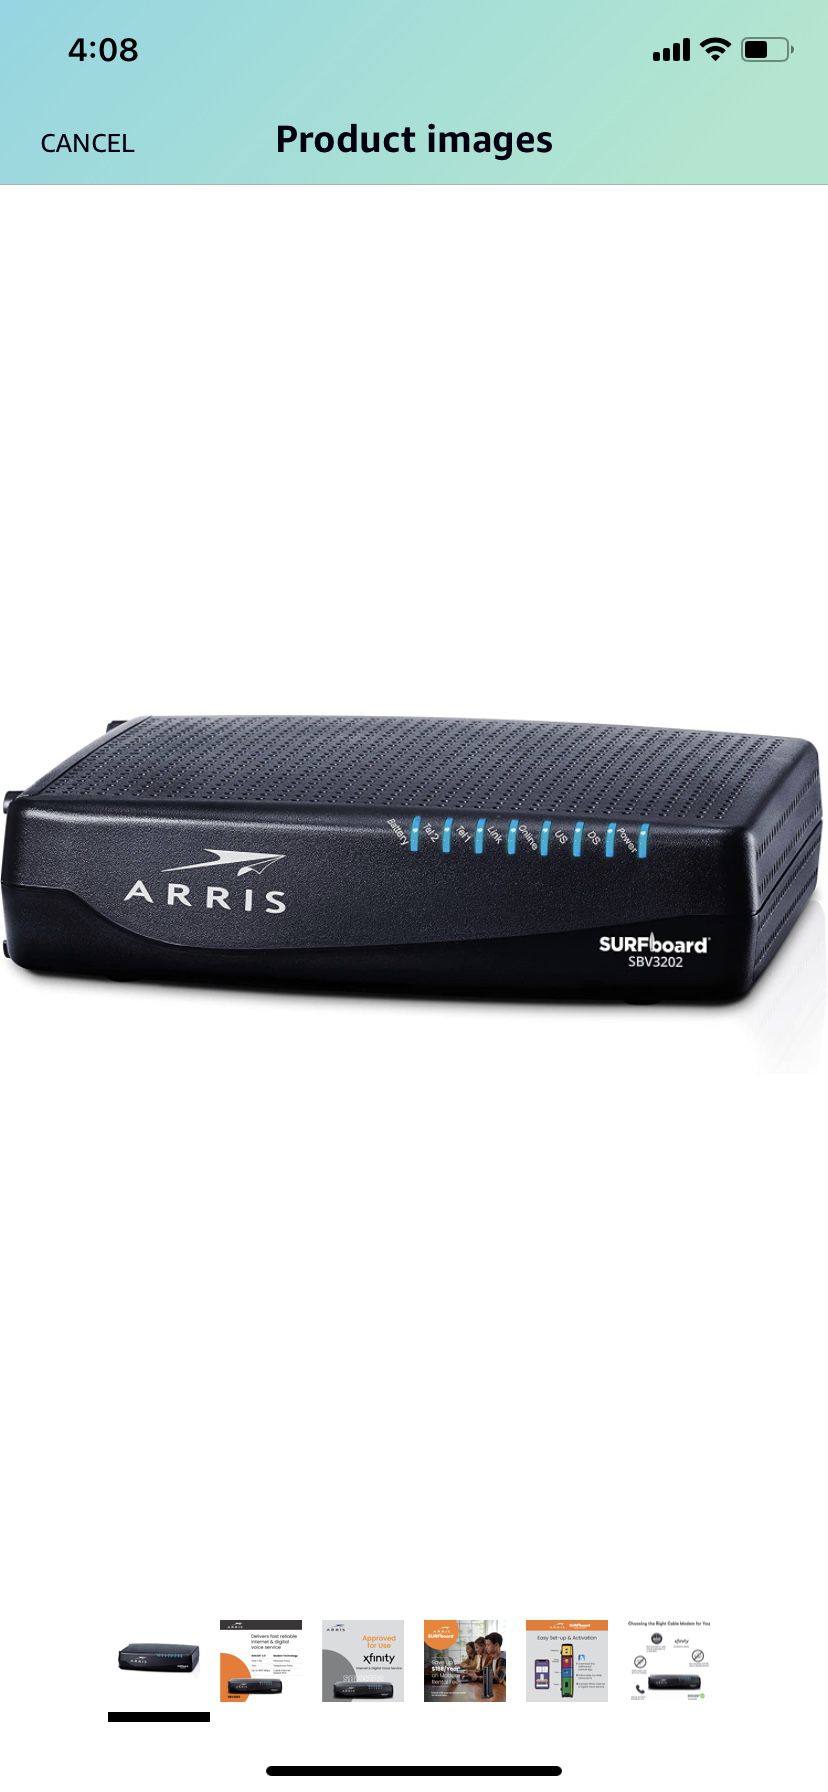 ARRIS SURFboard SBV3202 DOCSIS 3.0 Cable Modem | Comcast Xfinity Internet & Voice | 1 Gbps Port | 2 Telephony Ports | 800 Mbps Max with Xfinity Intern